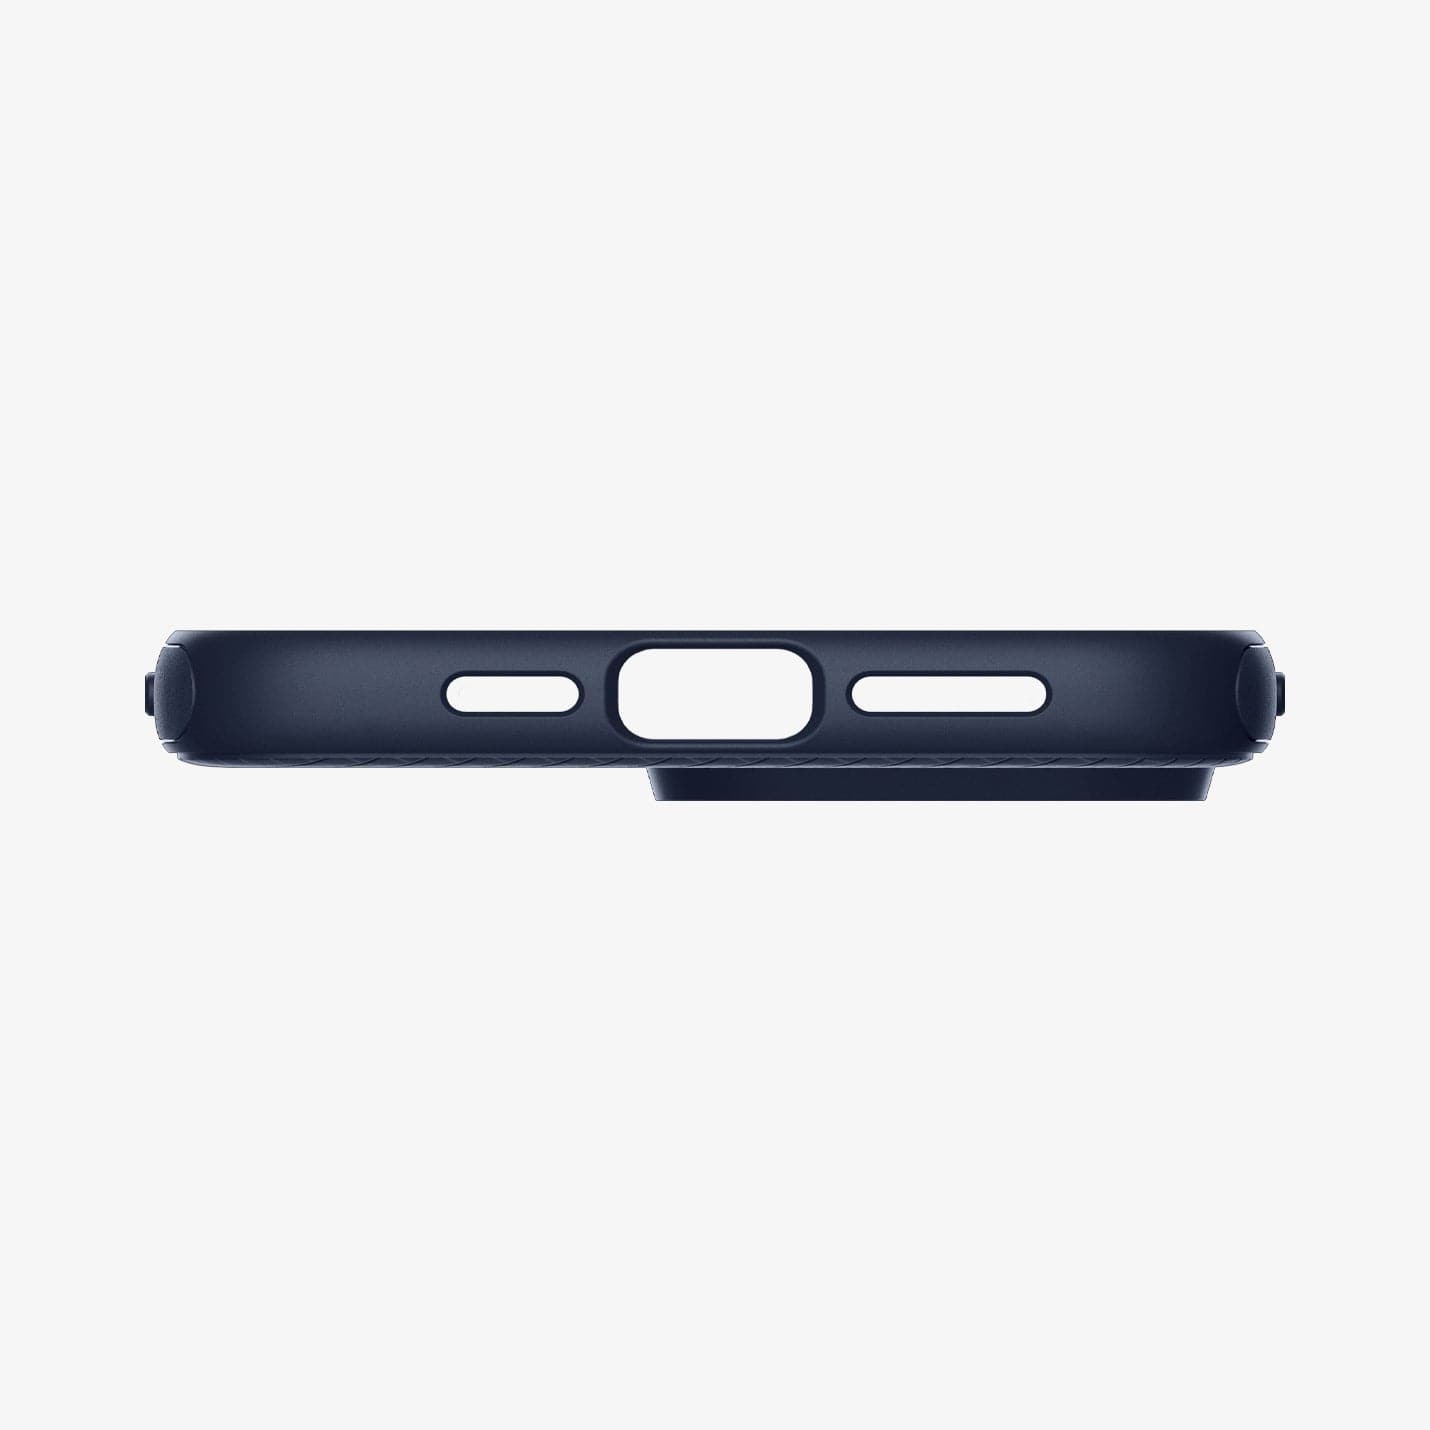 ACS04845 - iPhone 14 Pro Max Case Mag Armor (MagFit) in navy blue showing the bottom with precise cutouts